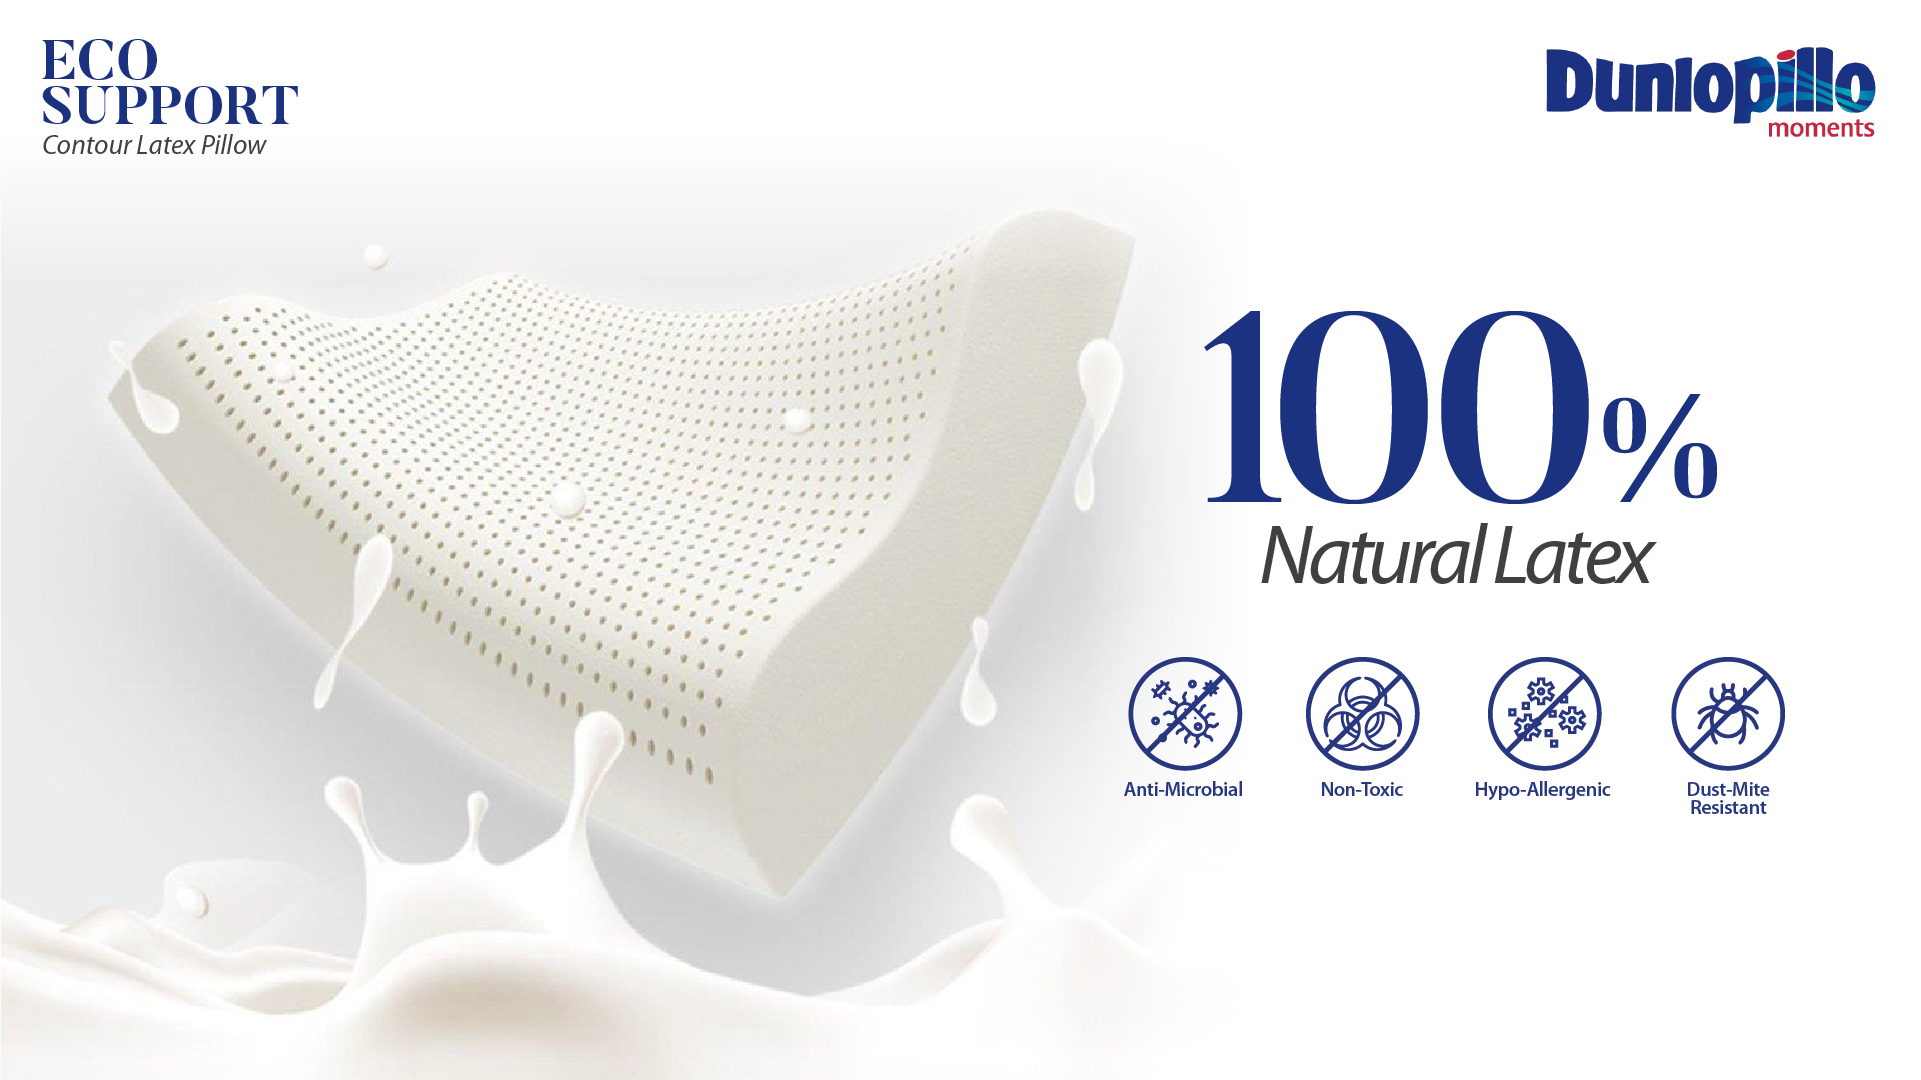 Eco Support Contour Latex Pillow 2